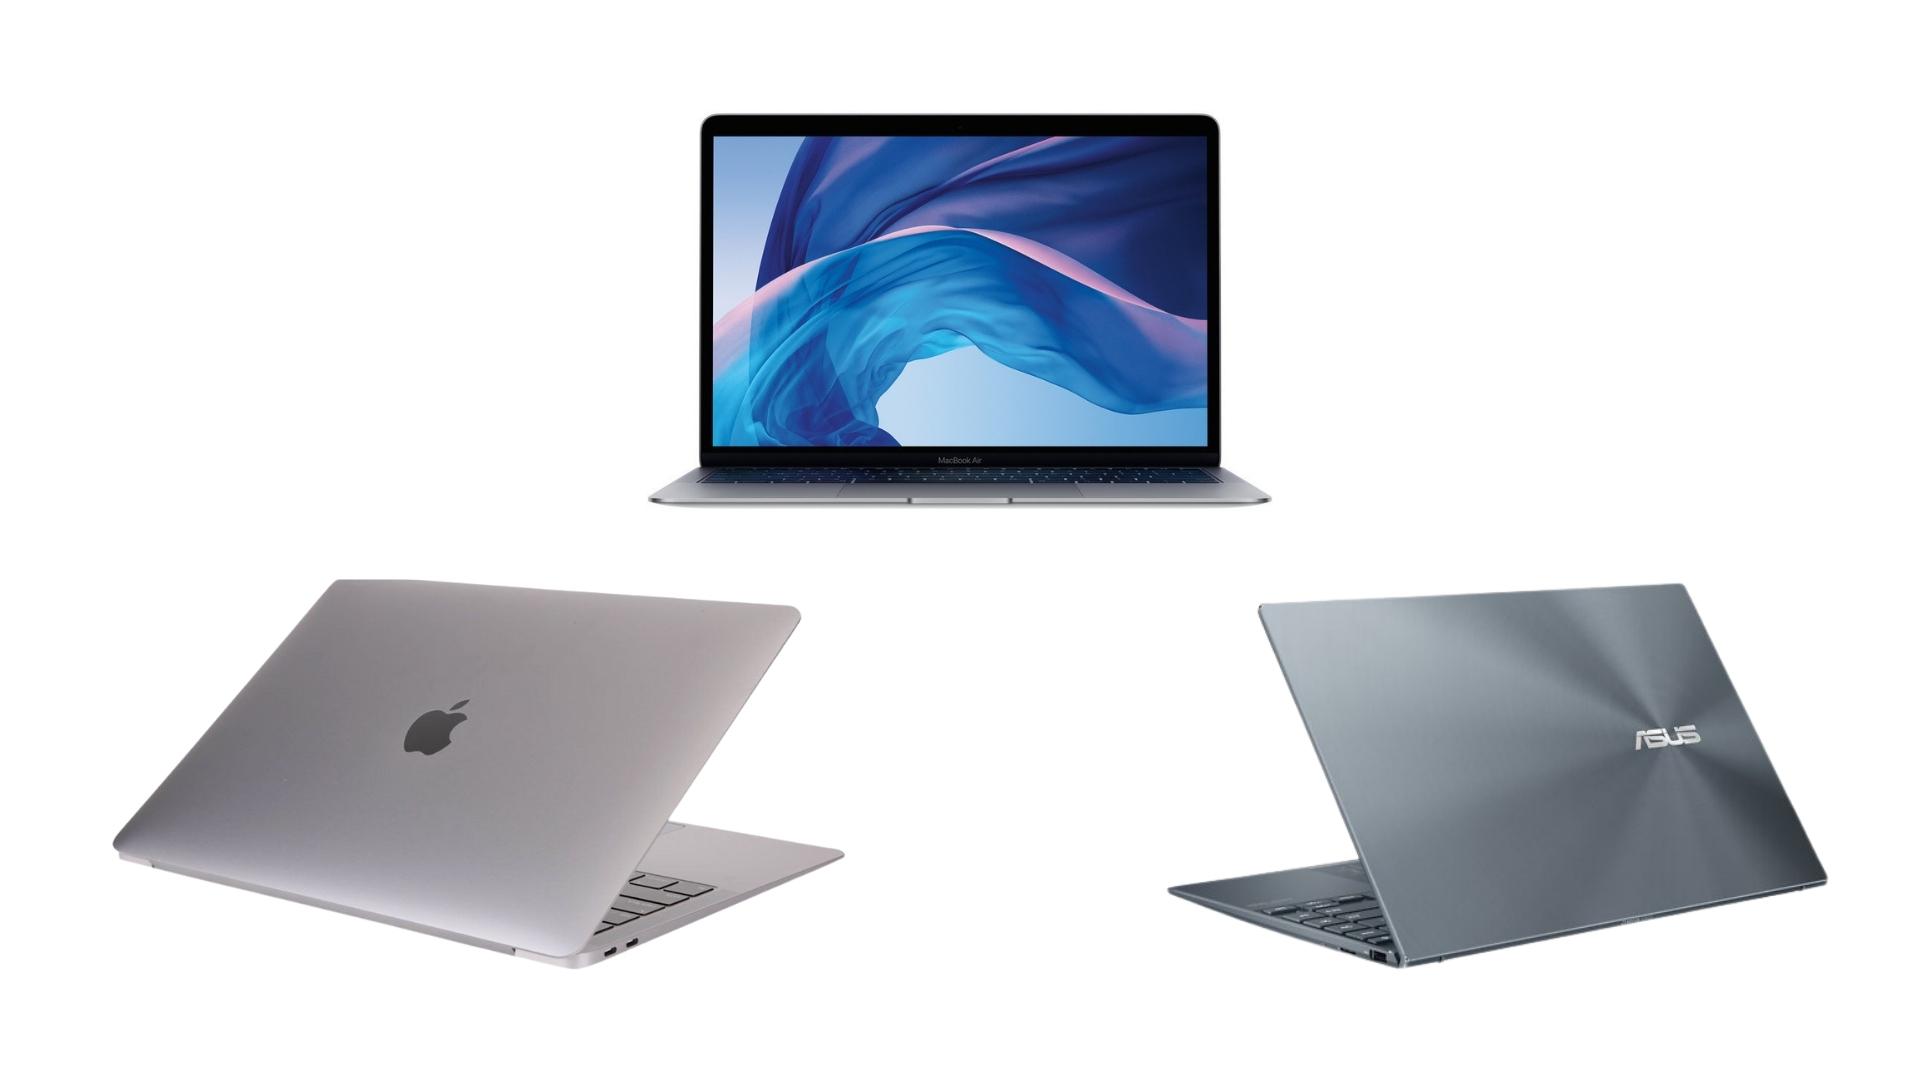 Best Laptops for Students